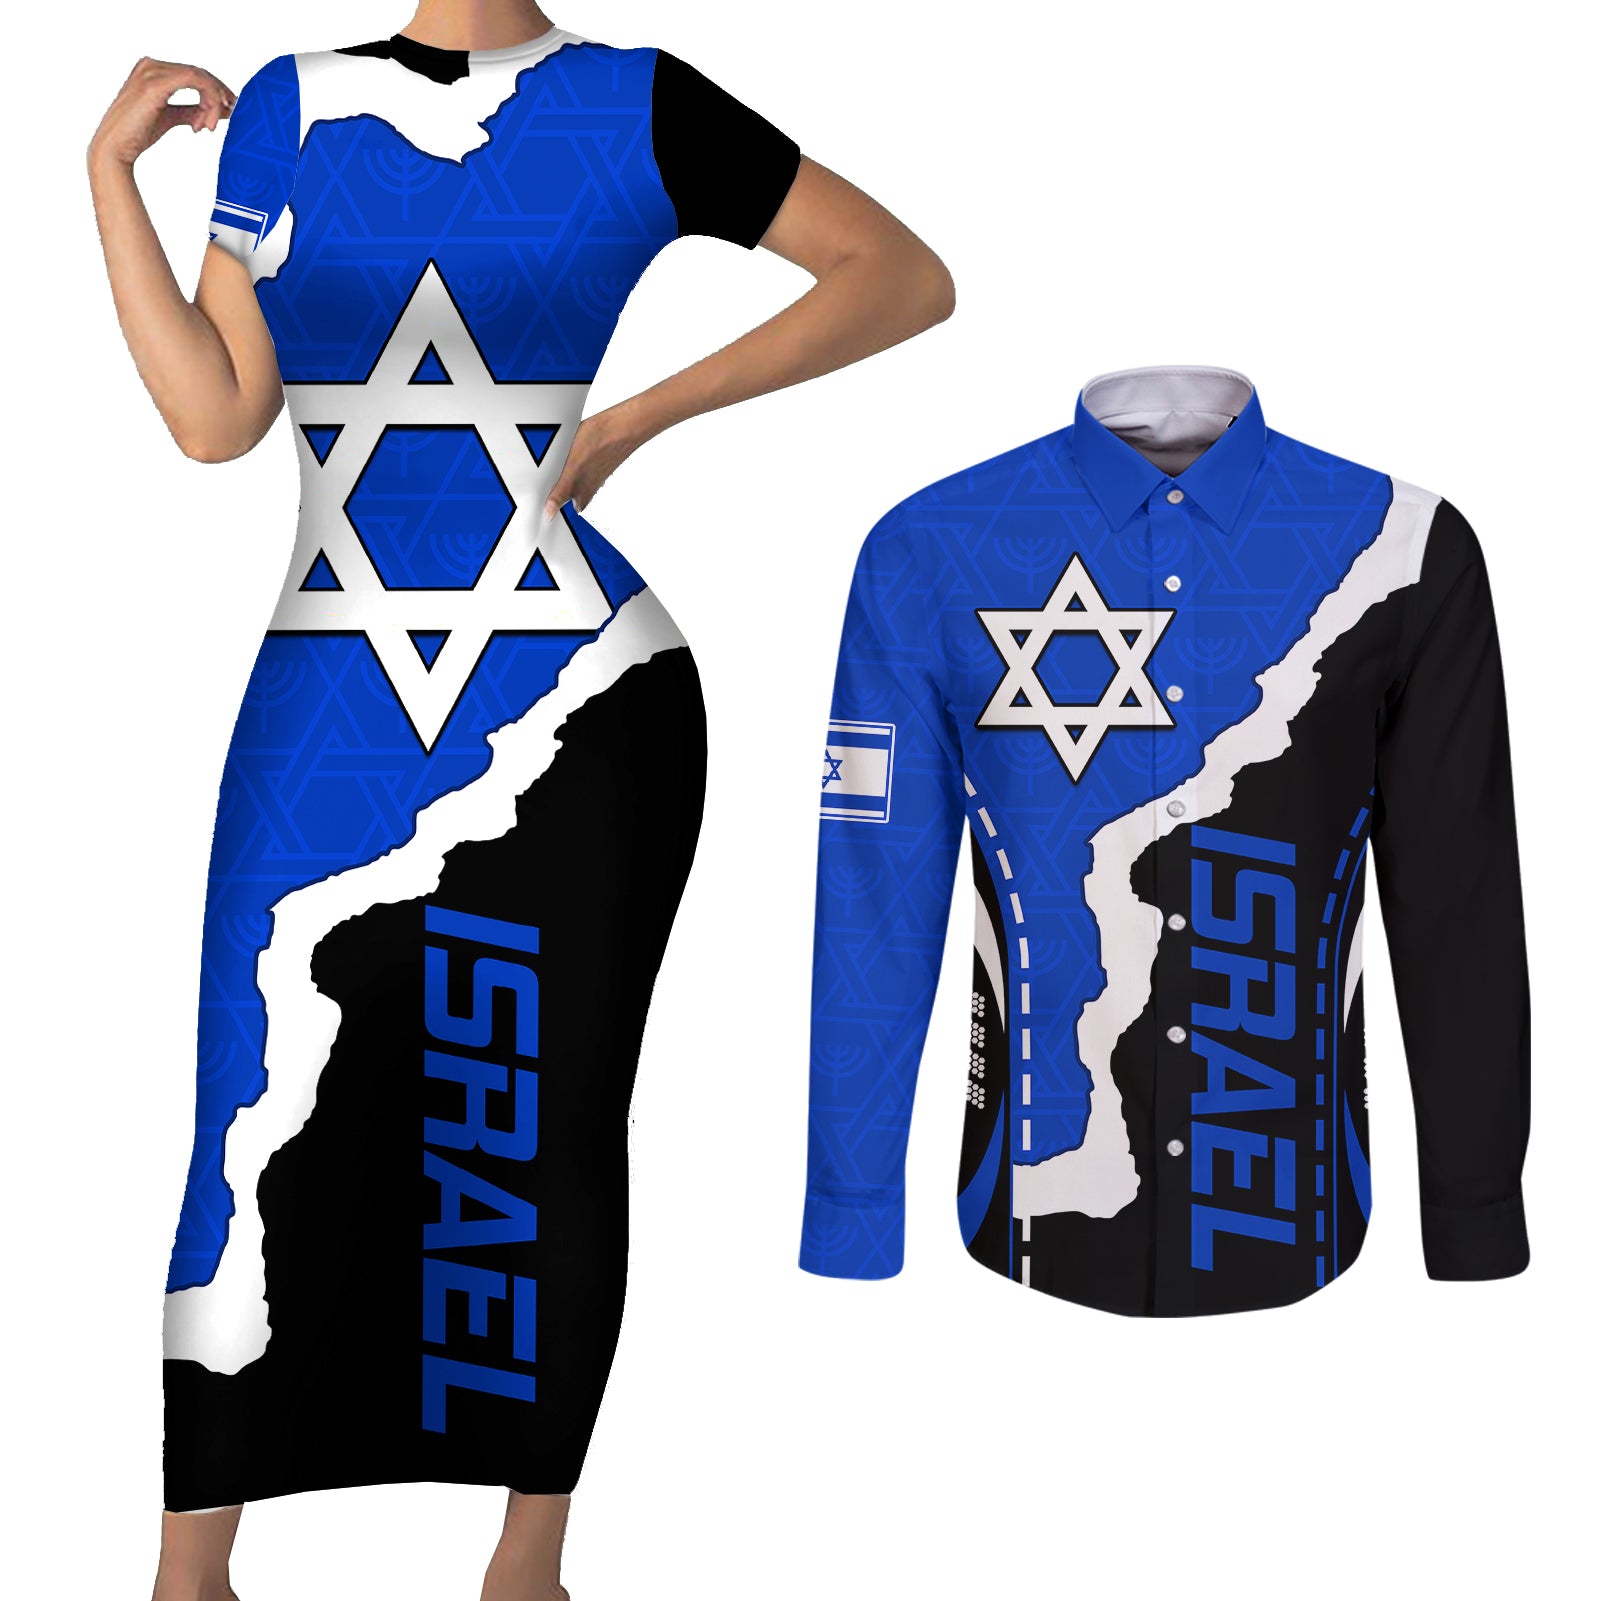 israel-couples-matching-short-sleeve-bodycon-dress-and-long-sleeve-button-shirts-stars-of-david-sporty-style